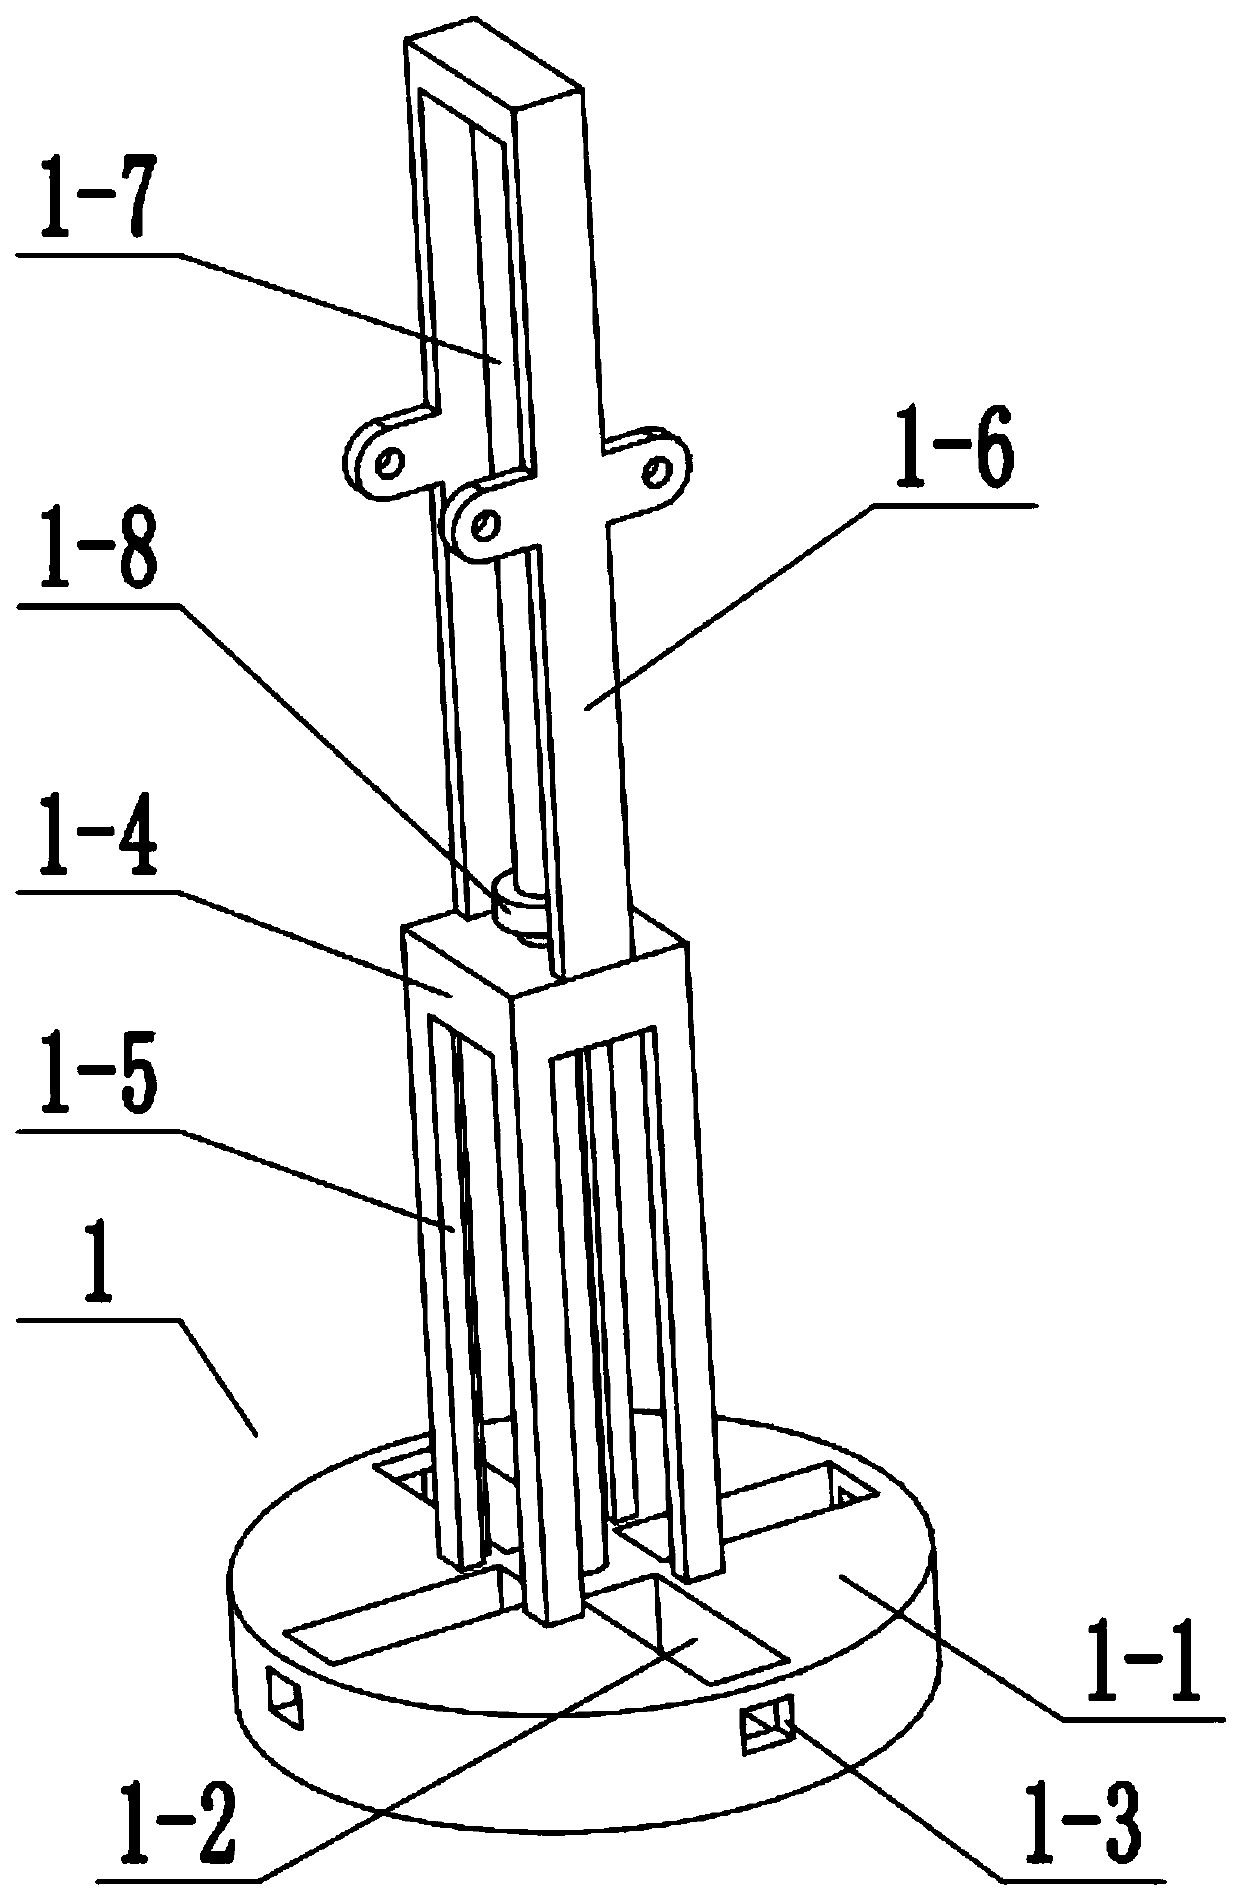 Small adjustable 5G signal receiving tower